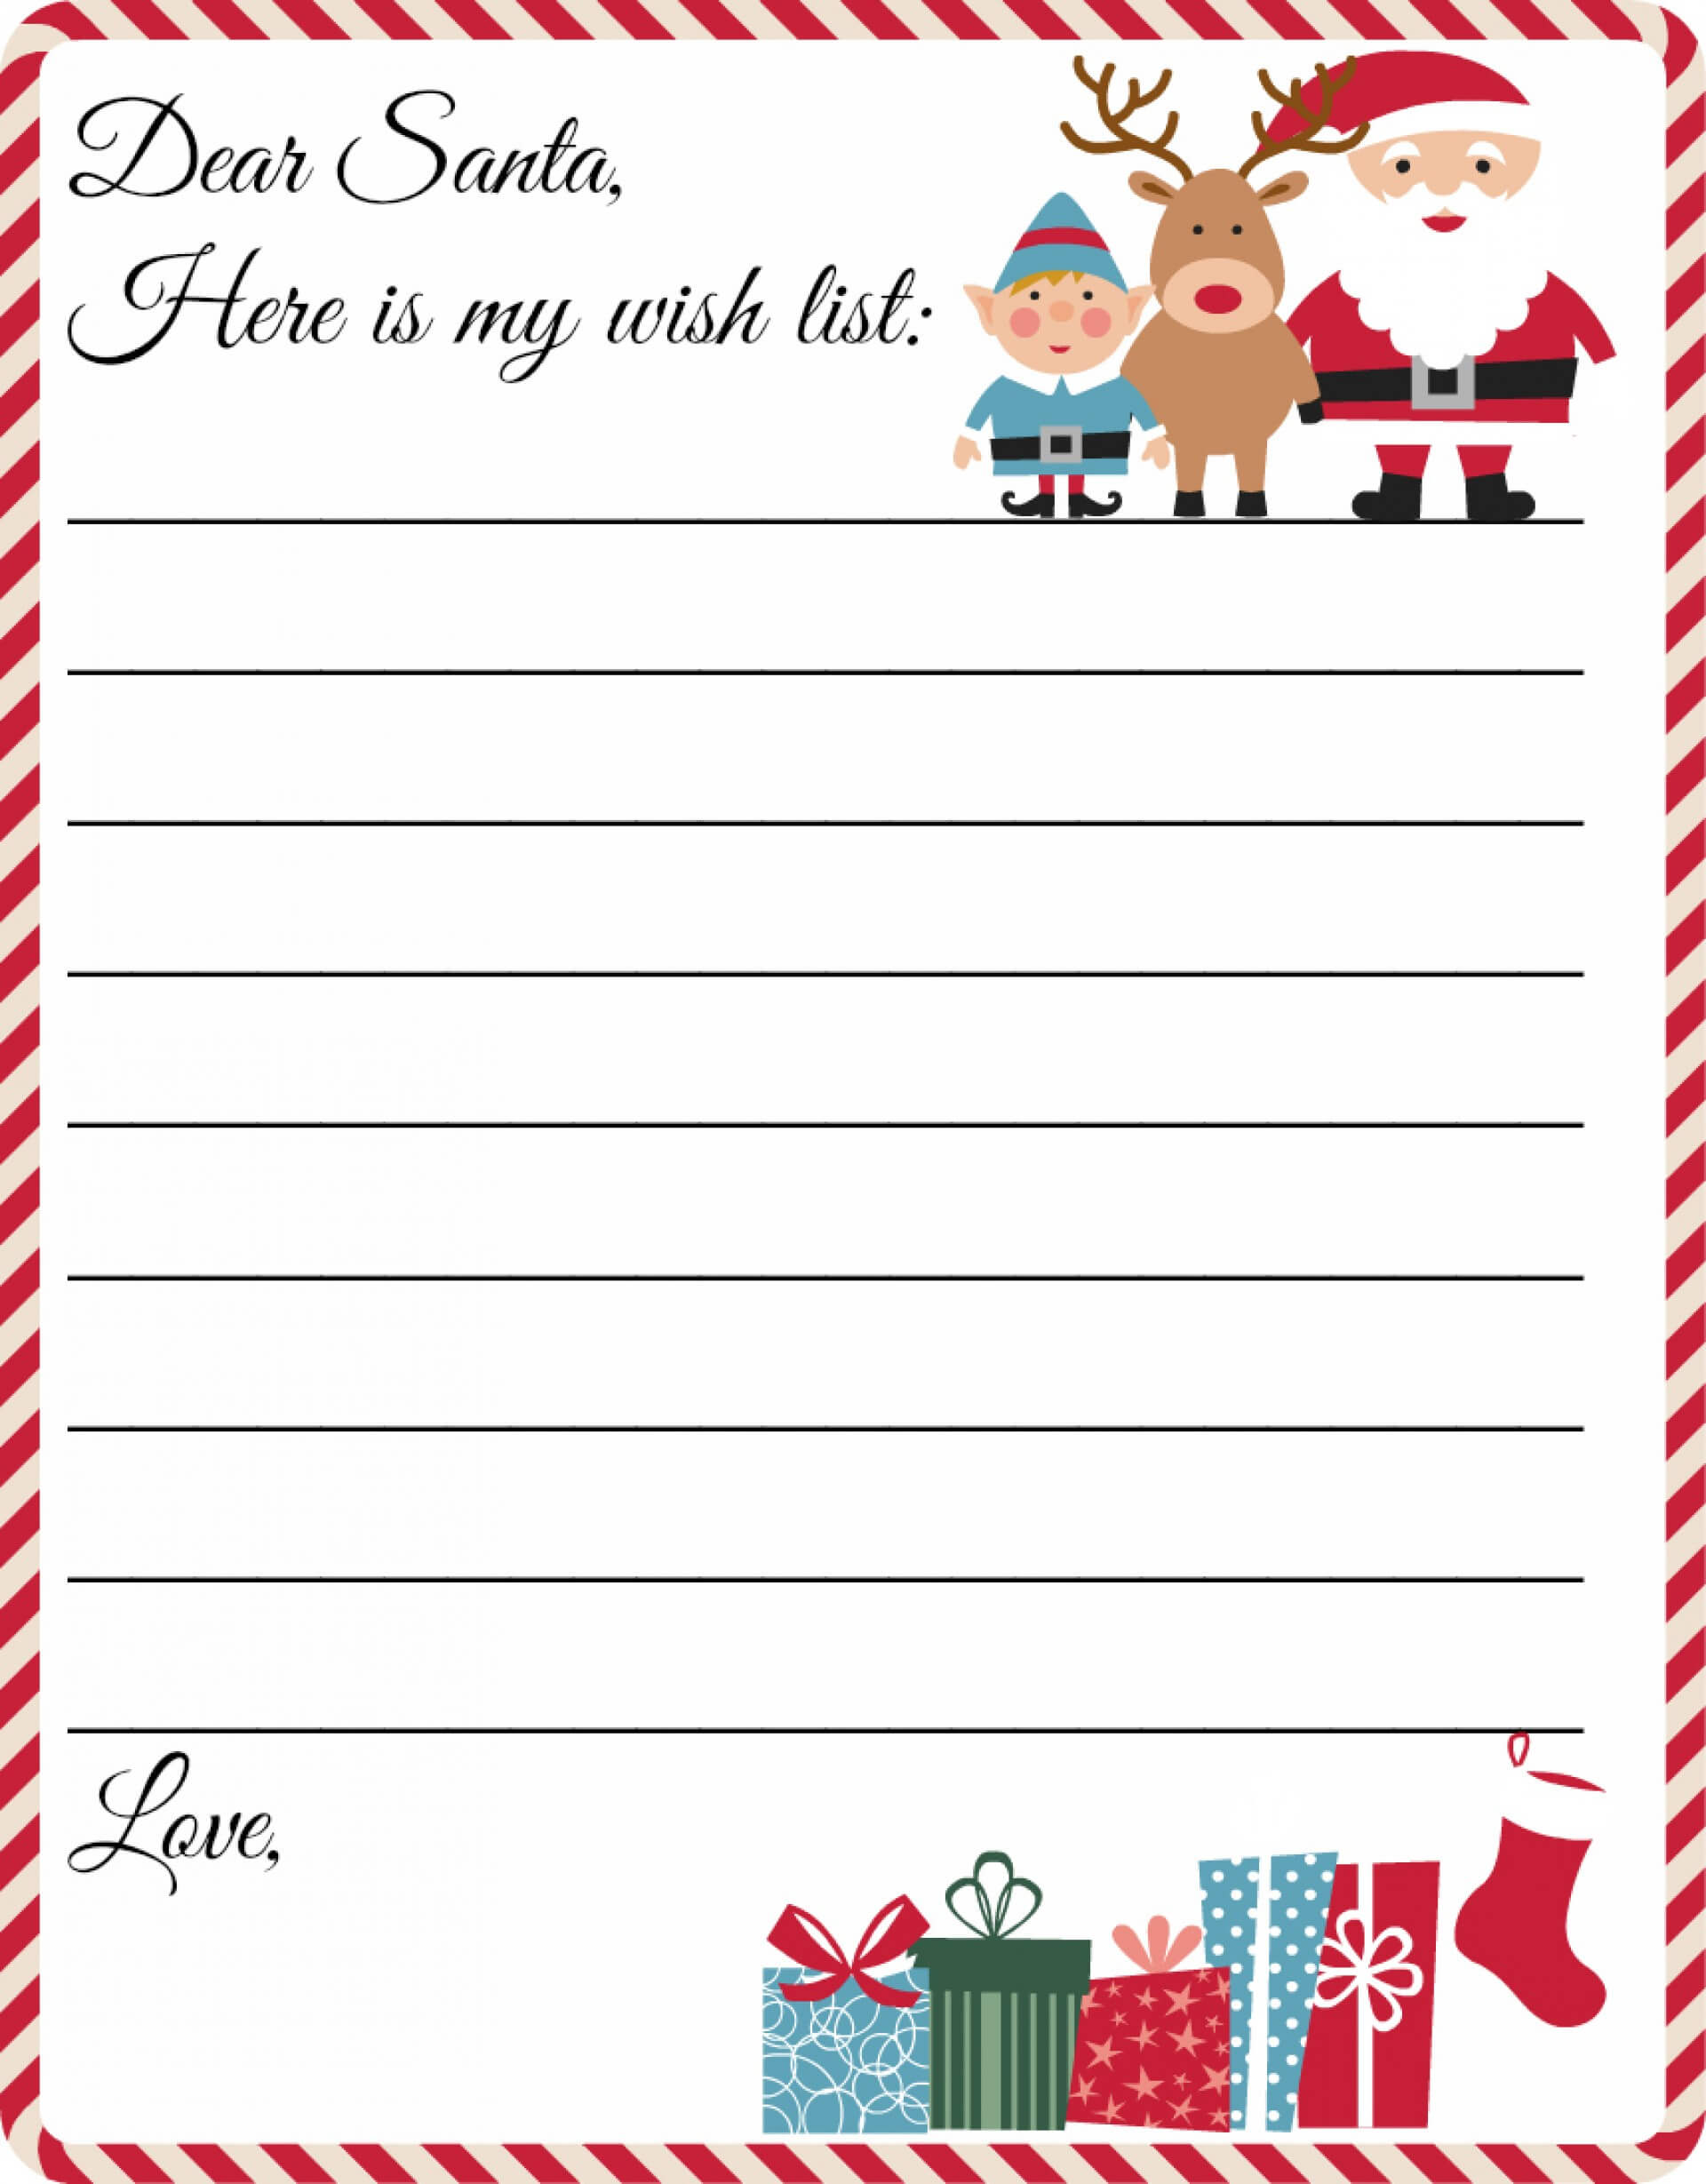 006 Template Ideas Ms Word Letter From Santa Letters To With Regard To Letter From Santa Template Word